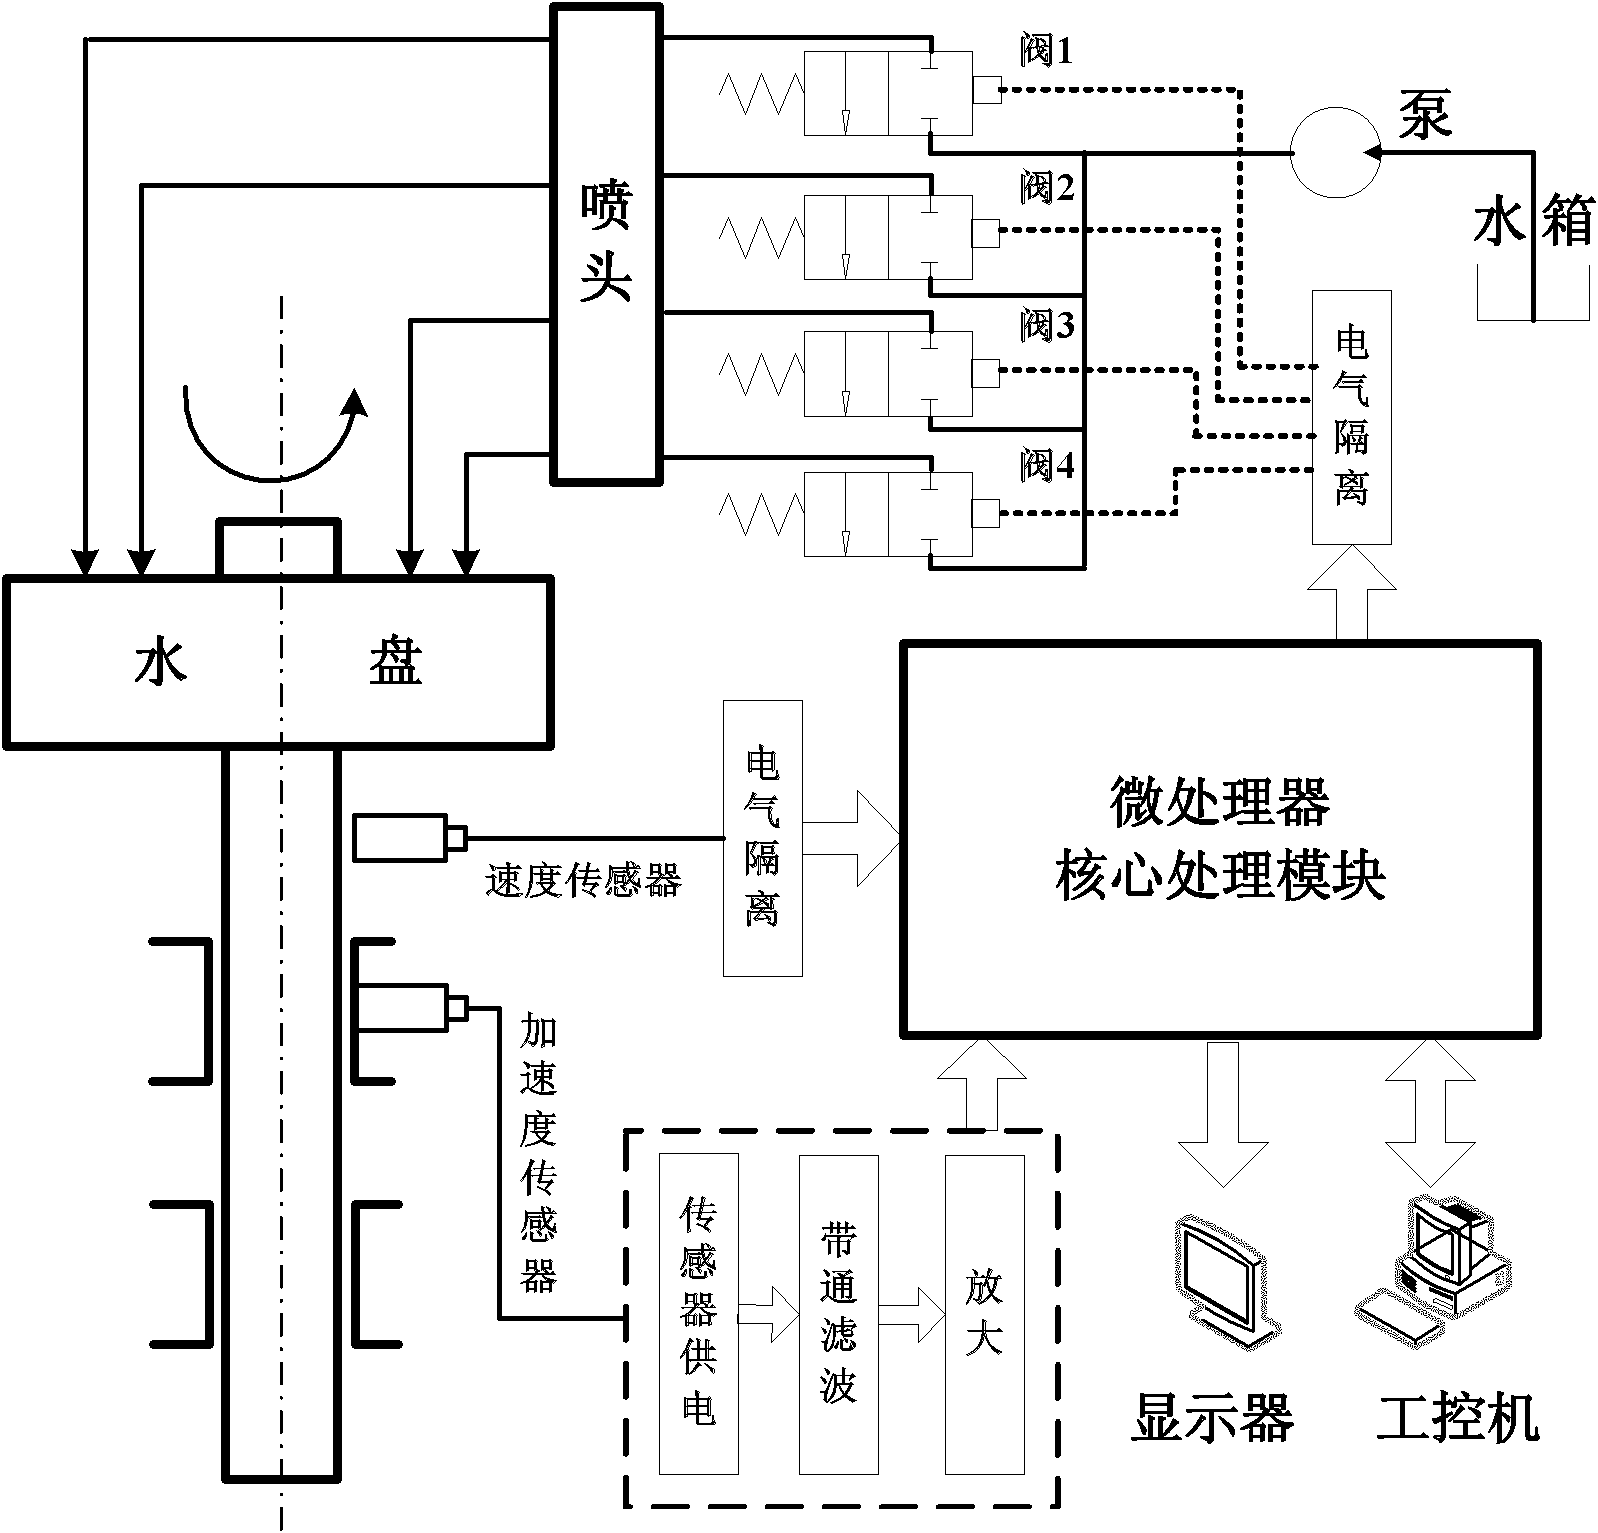 Automatic on-line balancing system of liquid-injection high-speed main shaft